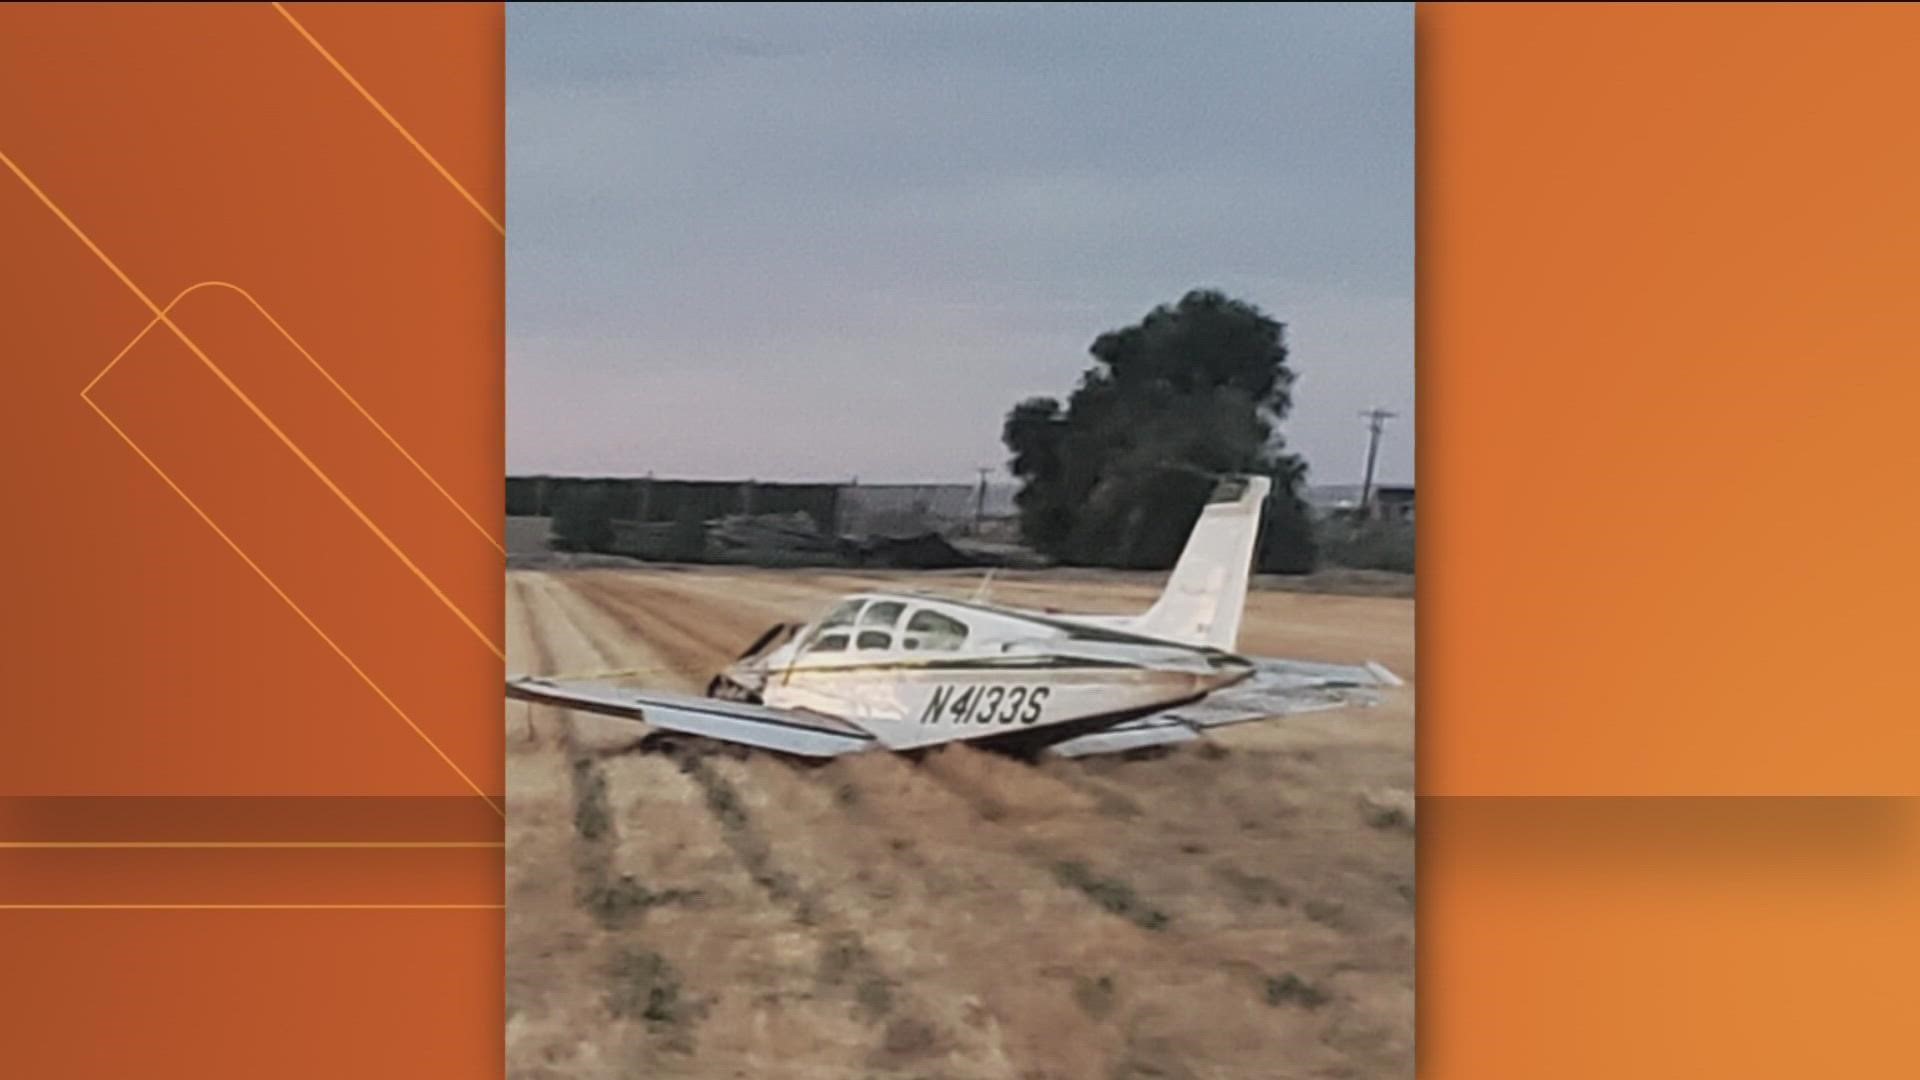 The men were taken to the hospital with non-life-threatening injuries after their Cessna went down in Wilder, Idaho. They reported engine trouble en route to Parma.